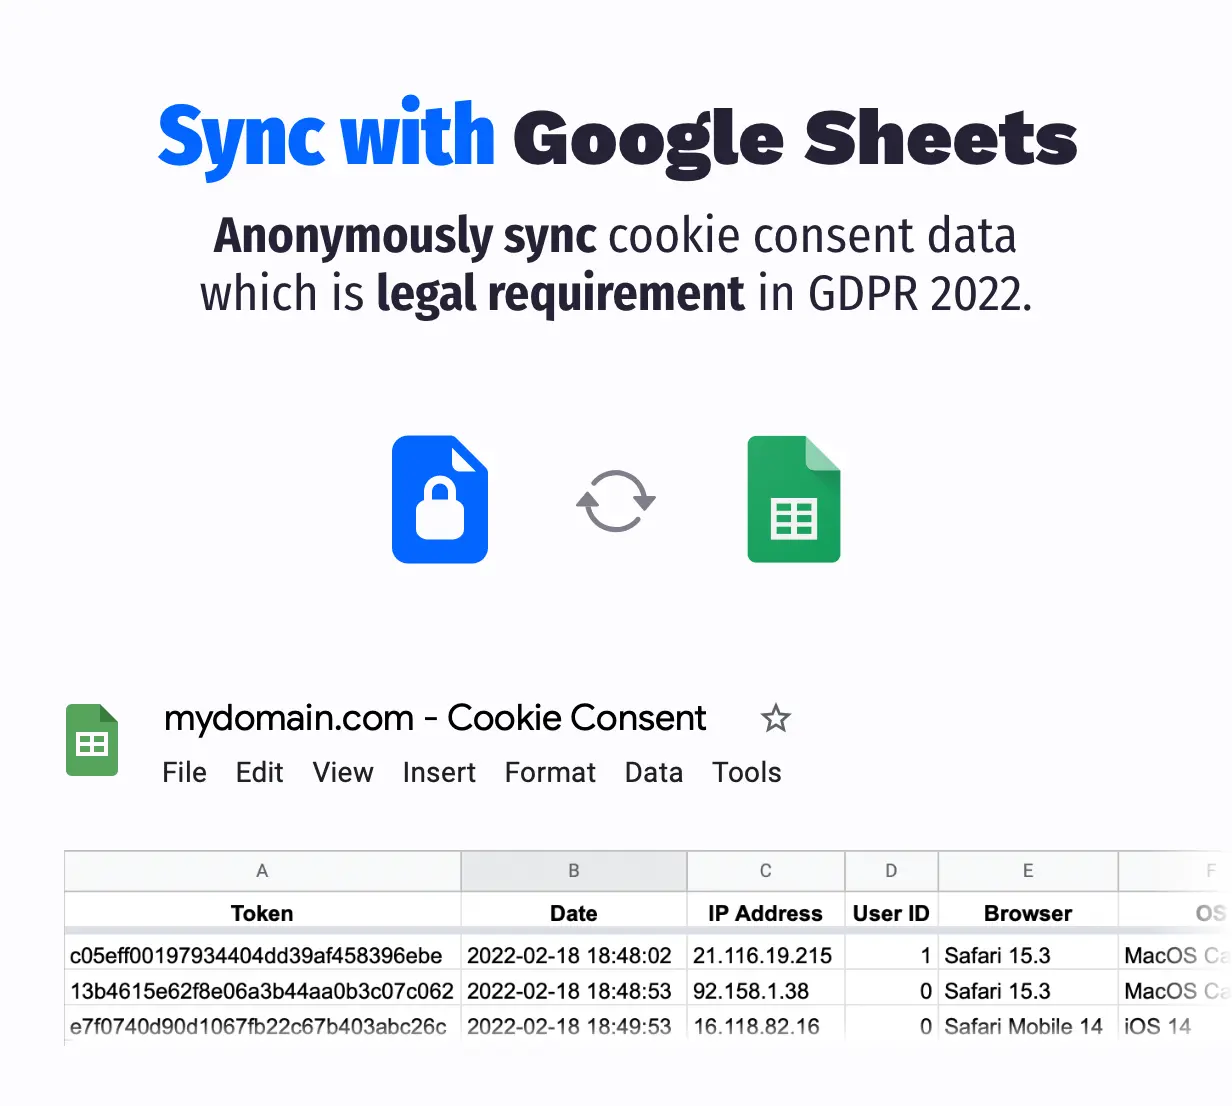 Sync with Google Sheets